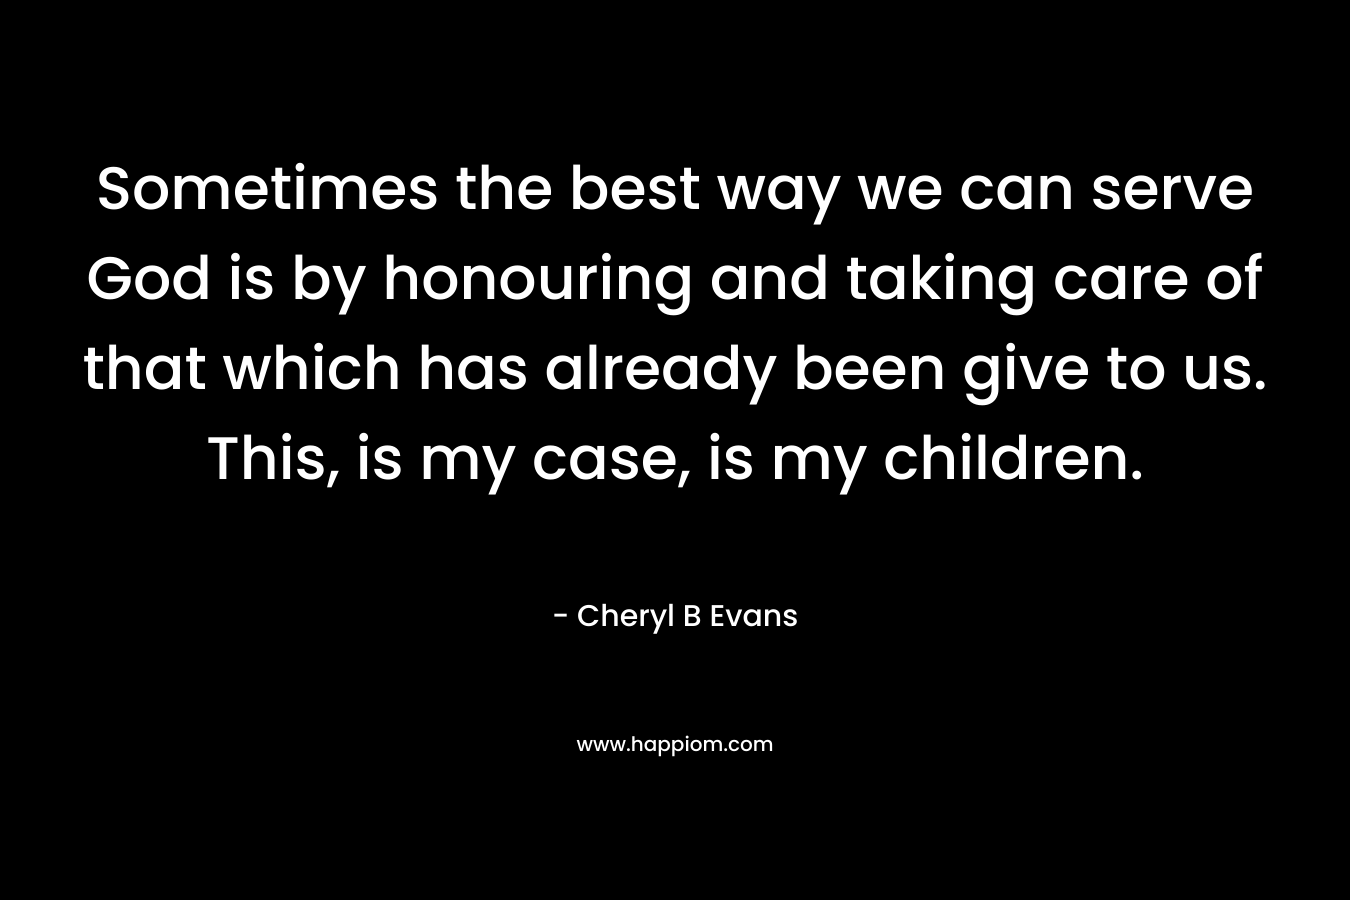 Sometimes the best way we can serve God is by honouring and taking care of that which has already been give to us. This, is my case, is my children. – Cheryl B Evans